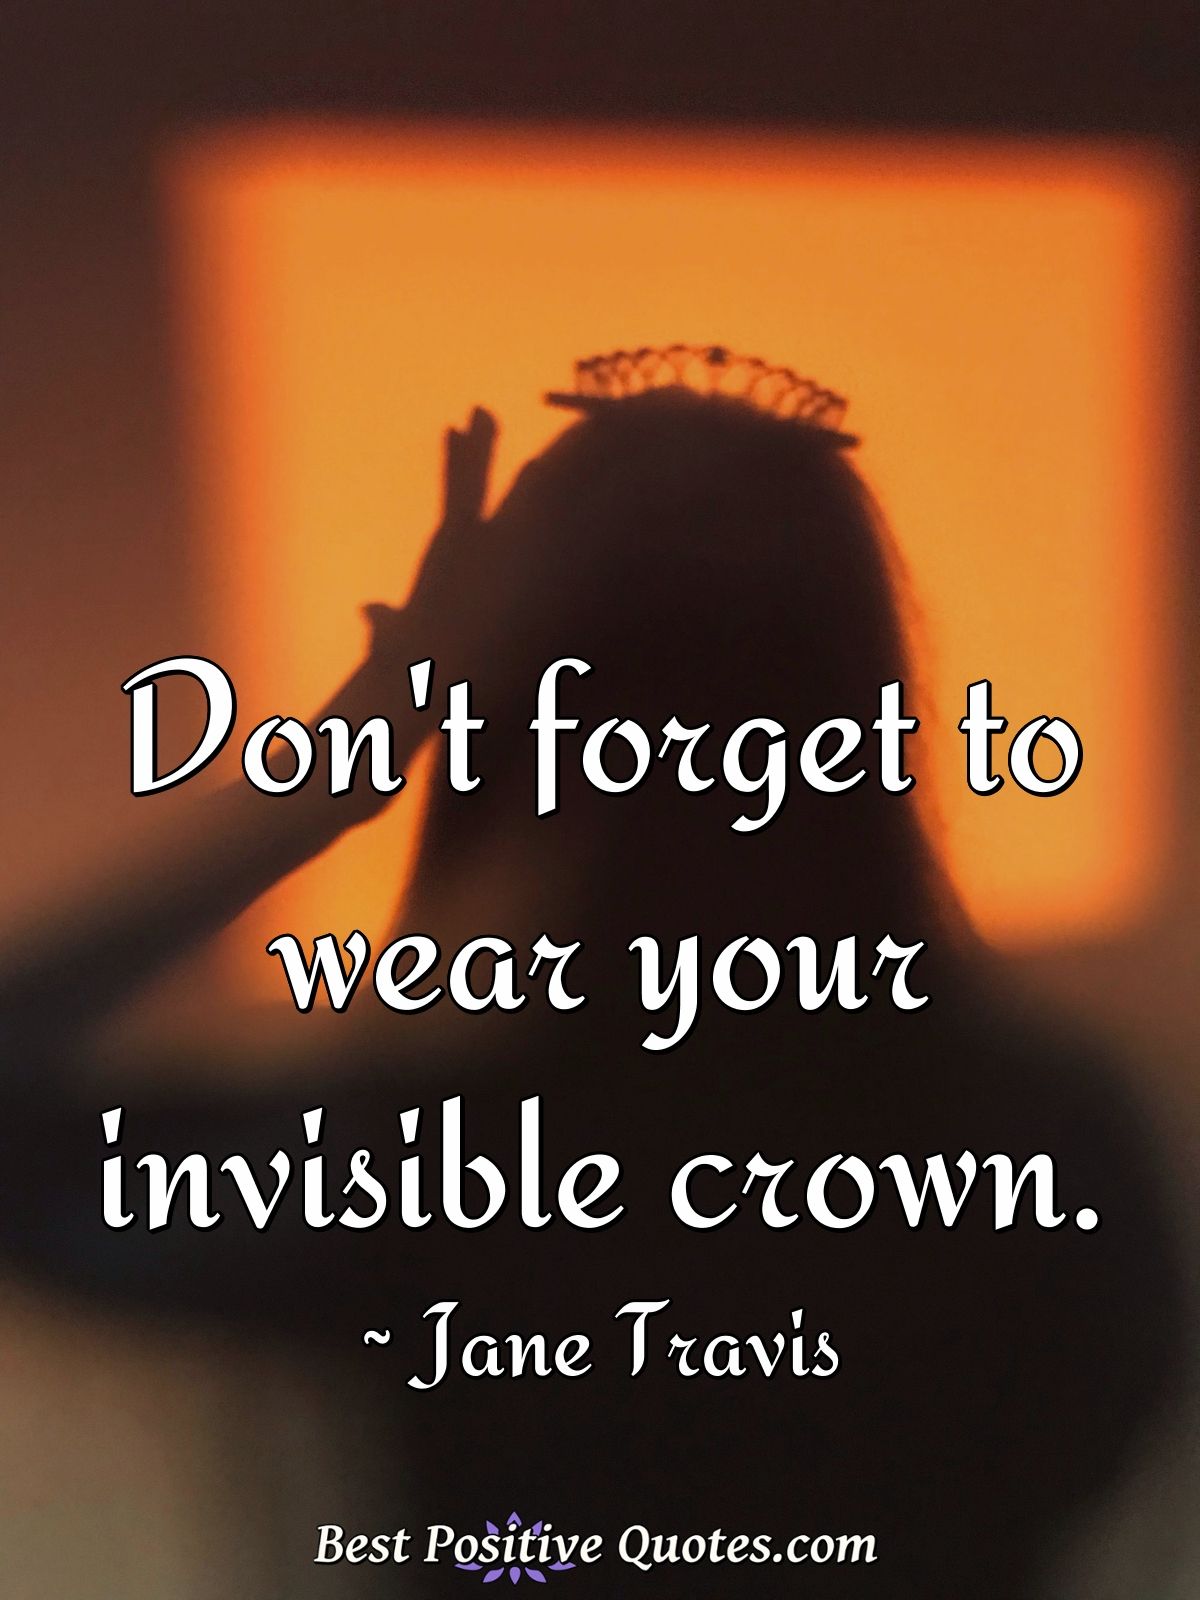 Don't forget to wear your invisible crown. - Jane Travis